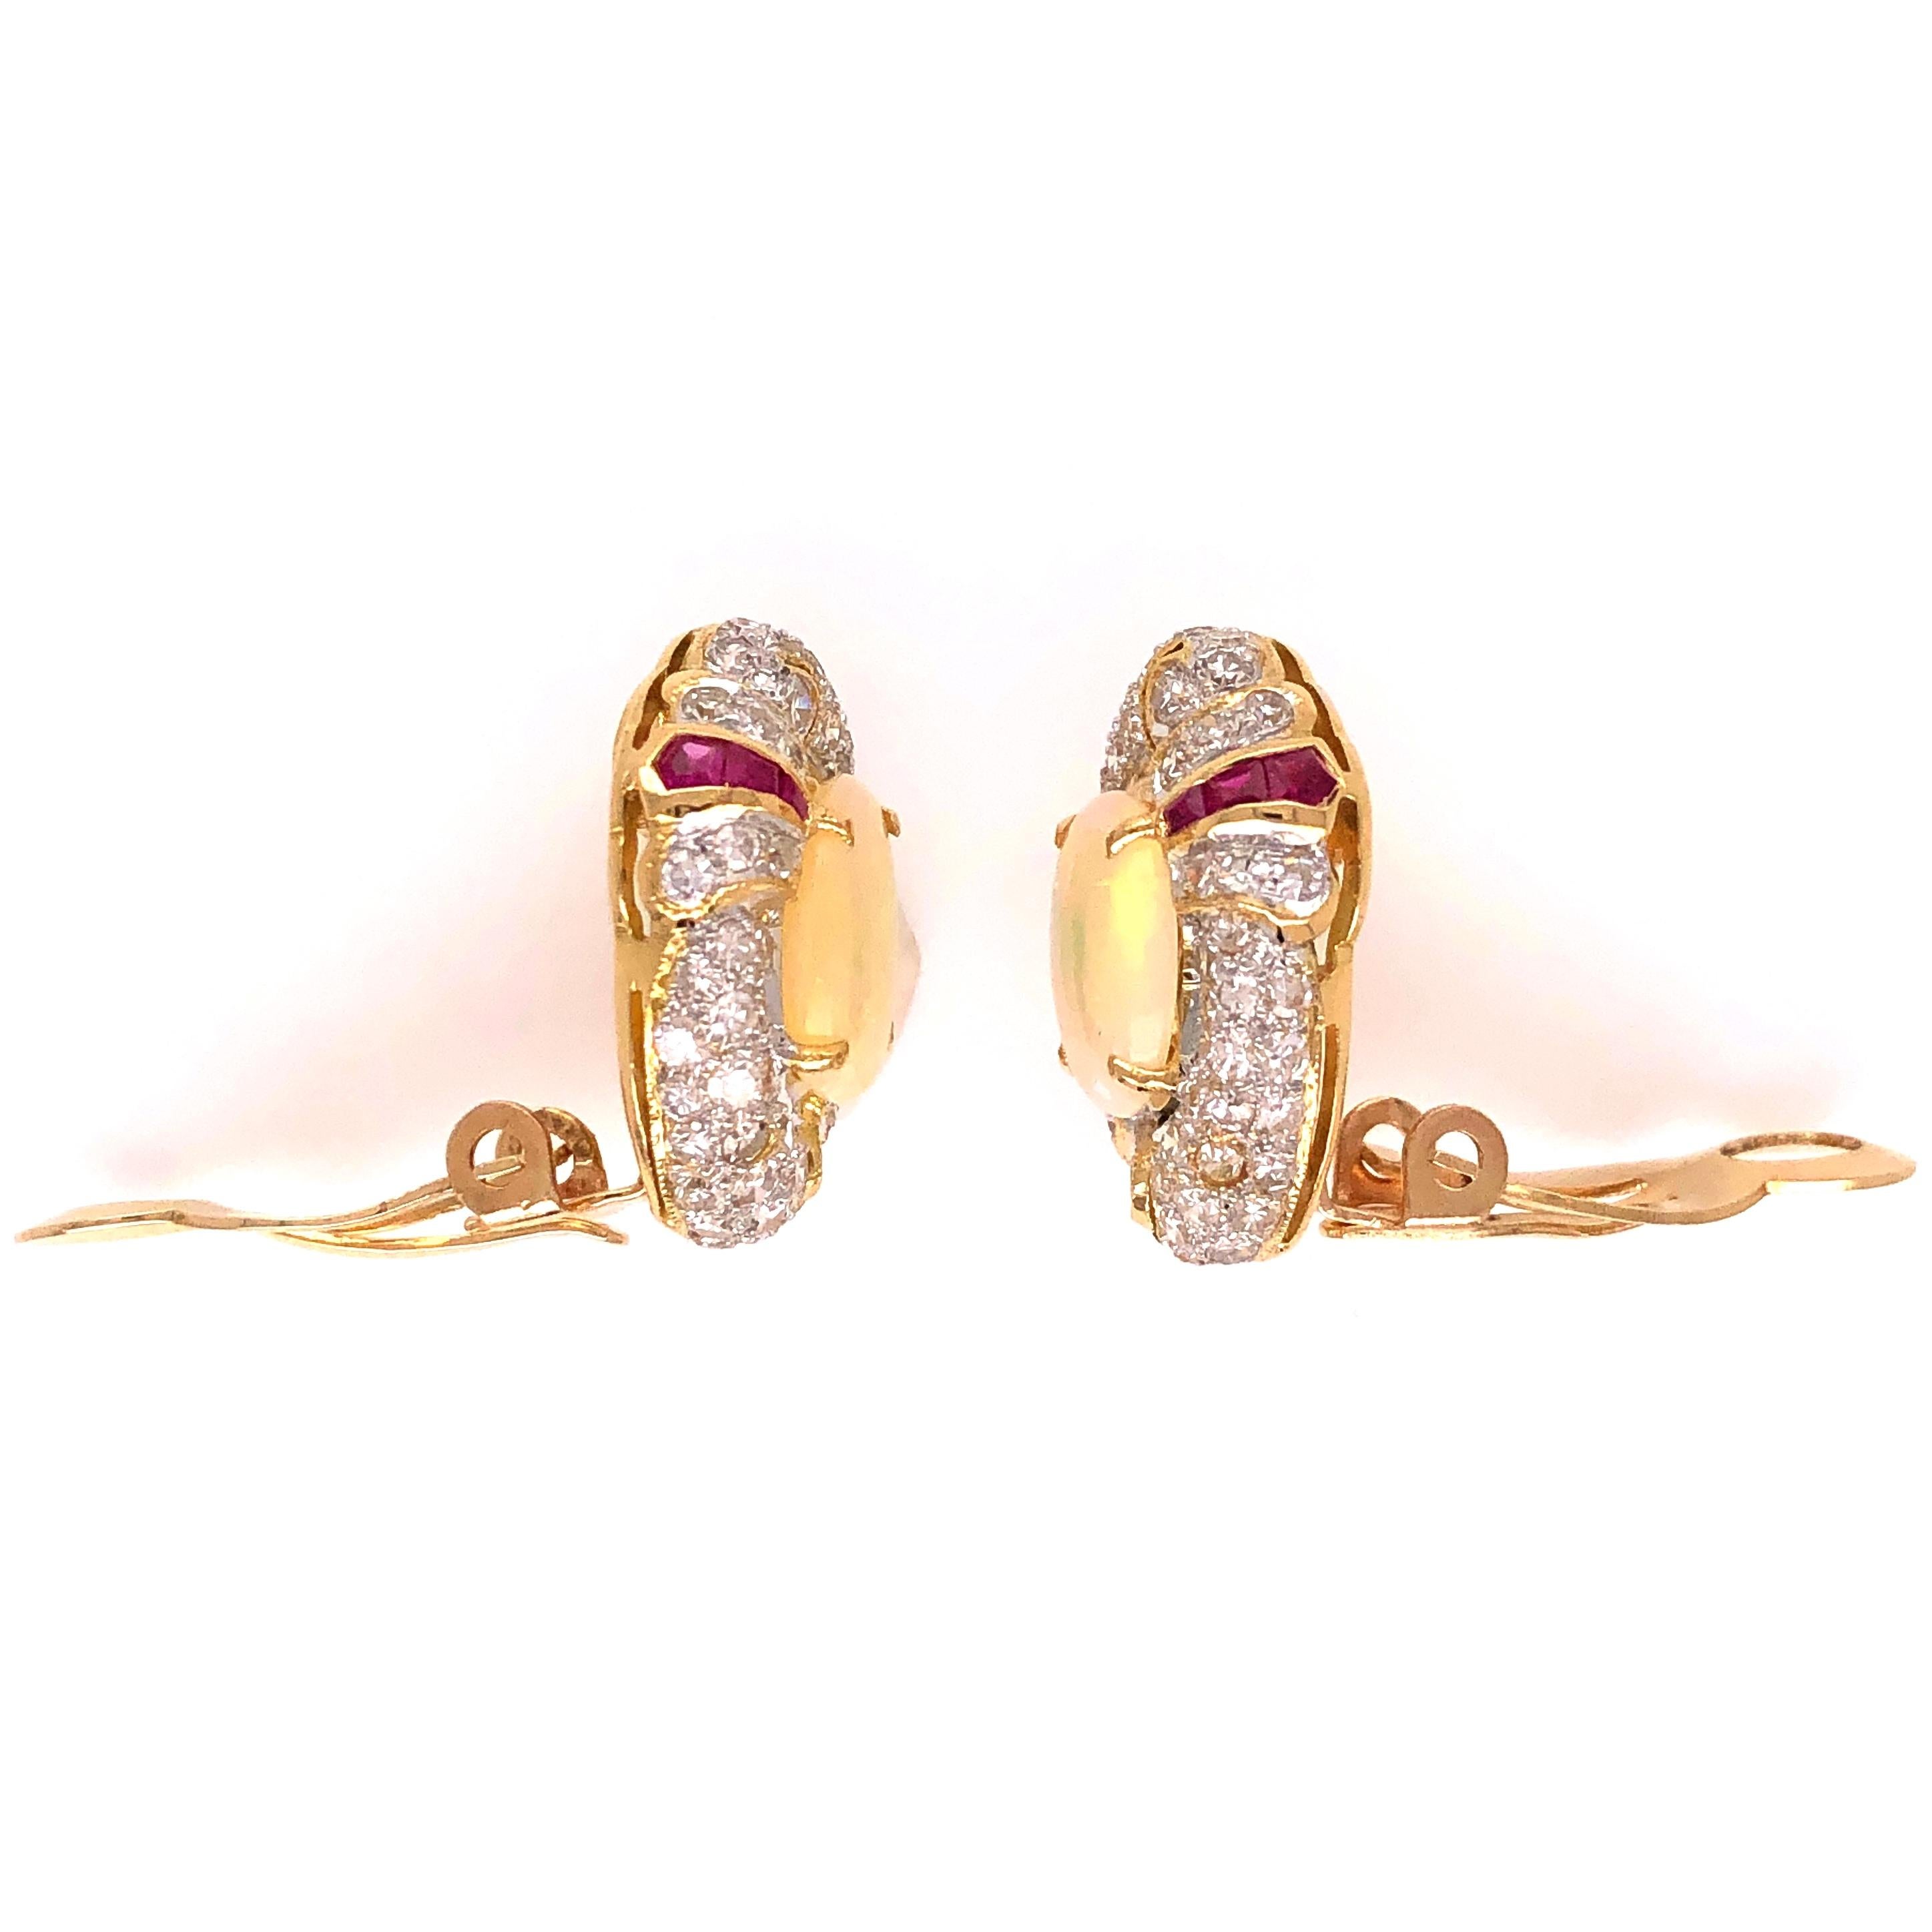 Simply Beautiful Opal Diamond Ruby French Clip Earrings. Center of each earring securely set with a White Opal, weighing 2.00tcw for the 2 opals, surrounded by Diamonds, approx. 1.75tcw and enhanced with Rubies. Hand crafted 18K Yellow Gold setting.